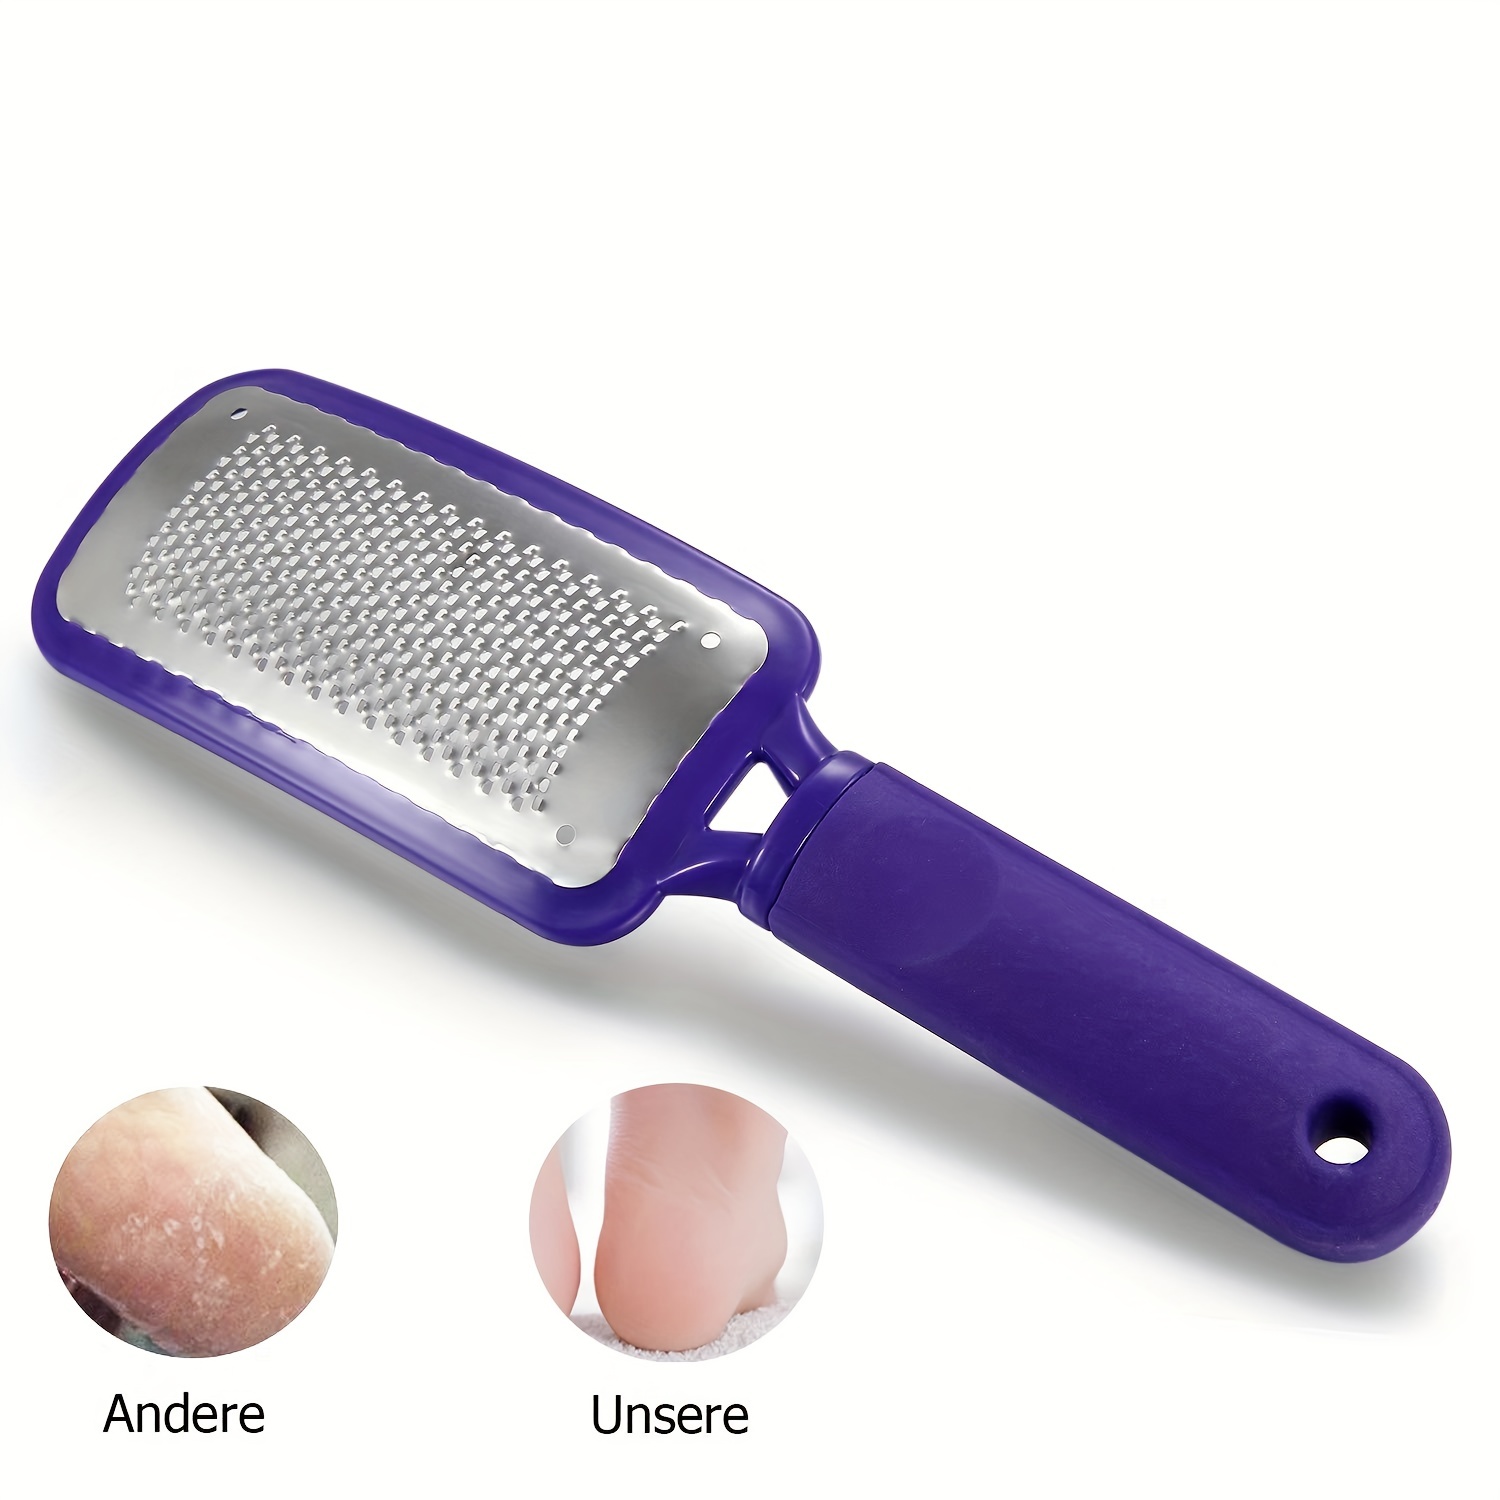 Rikans Colossal Foot File, Professional Foot Rasp Callus Remover, Foot Care  Pedicure Tool to Remove Hard Skin,Can Be Used on Wet or Dry Skin, Surgical